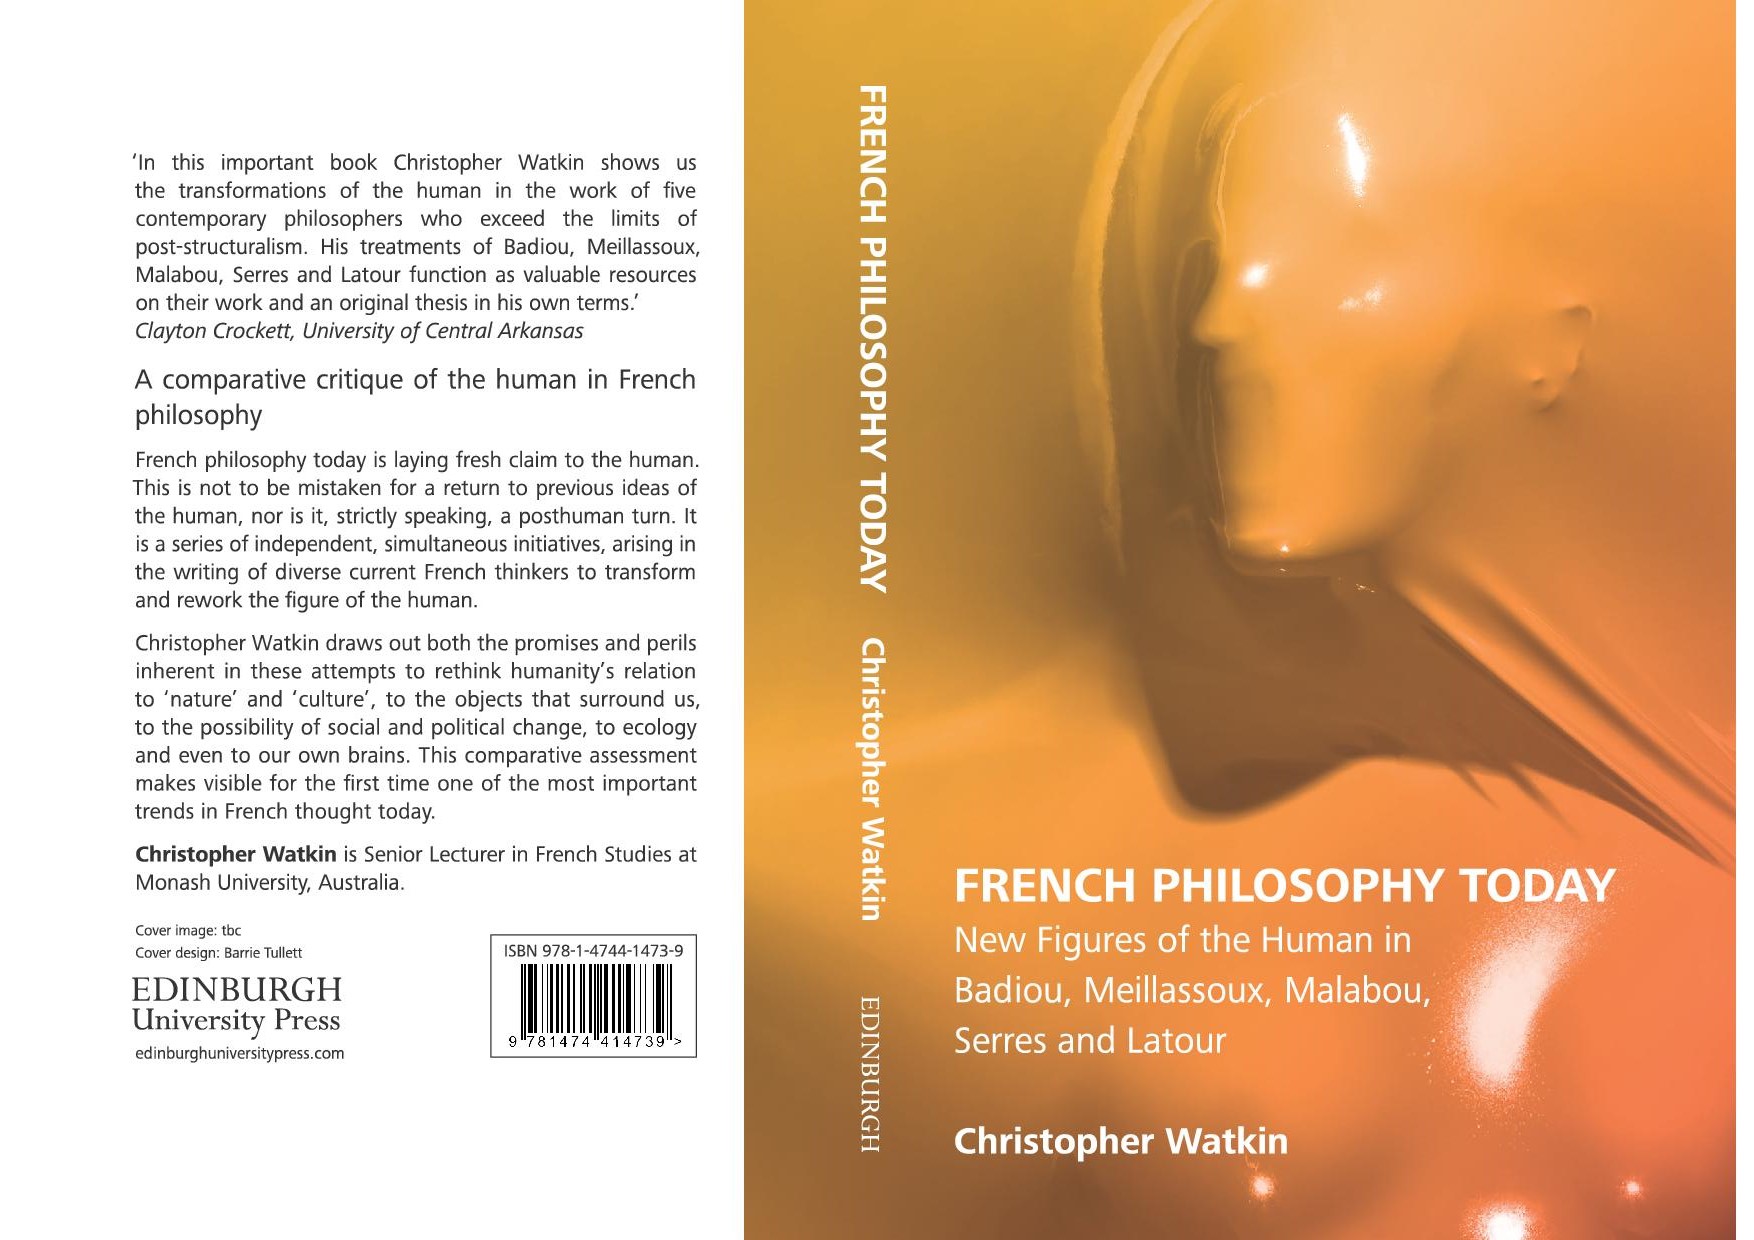 French Philosophy Today, First Cover Proof1